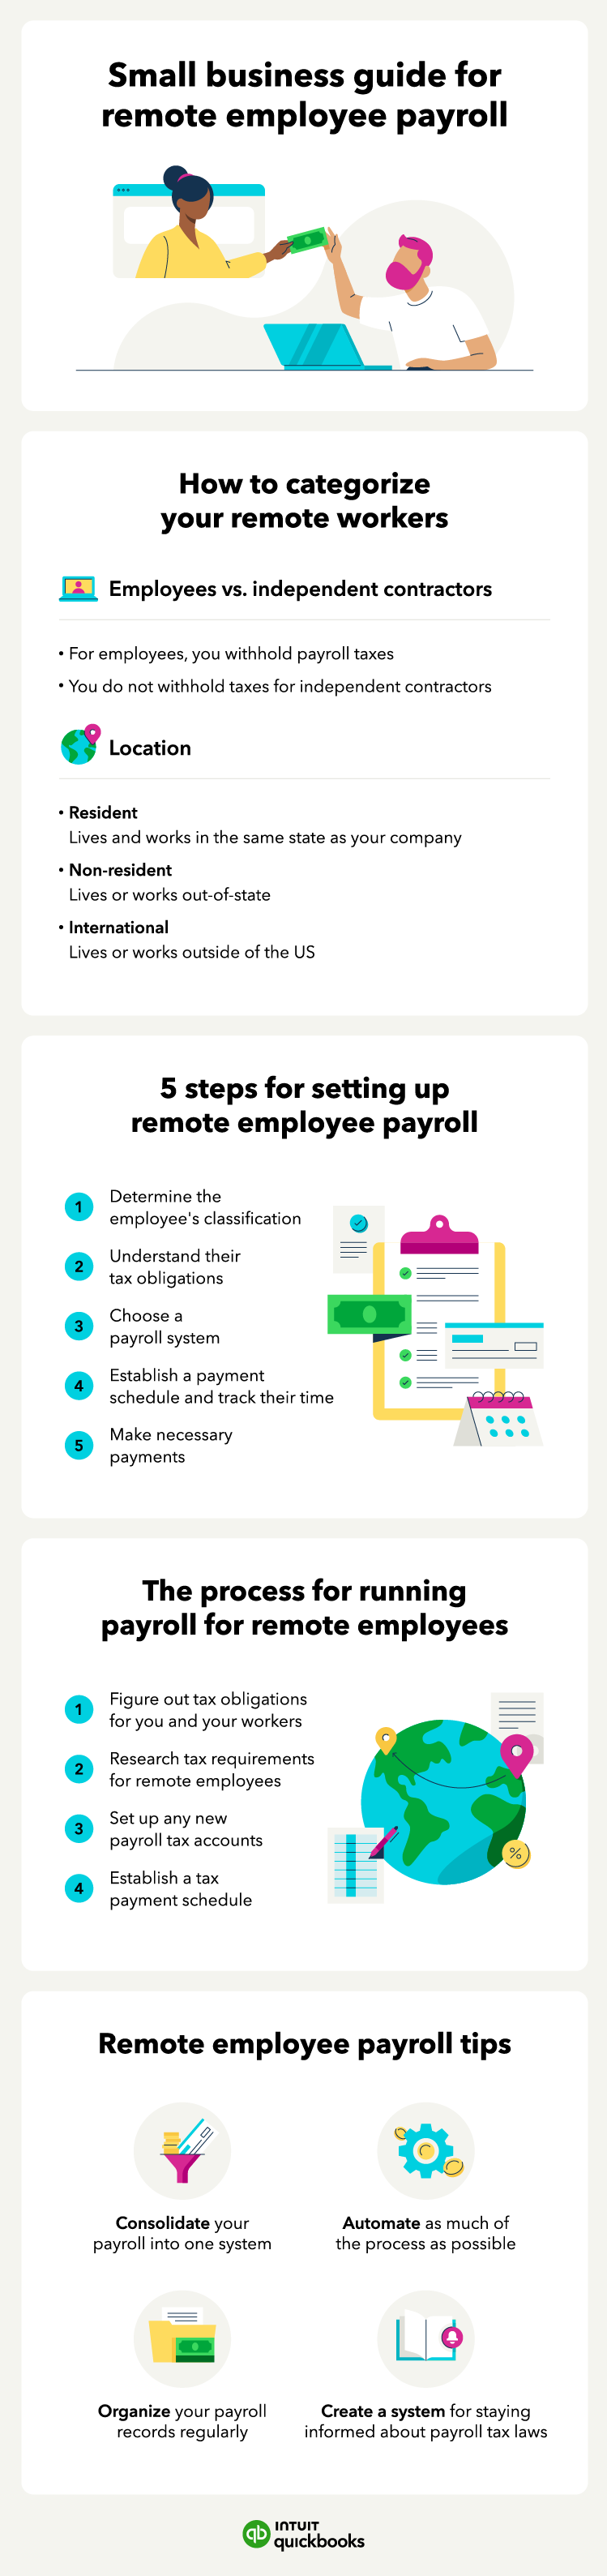 An infographic of how small businesses can start and run payroll for remote employees.